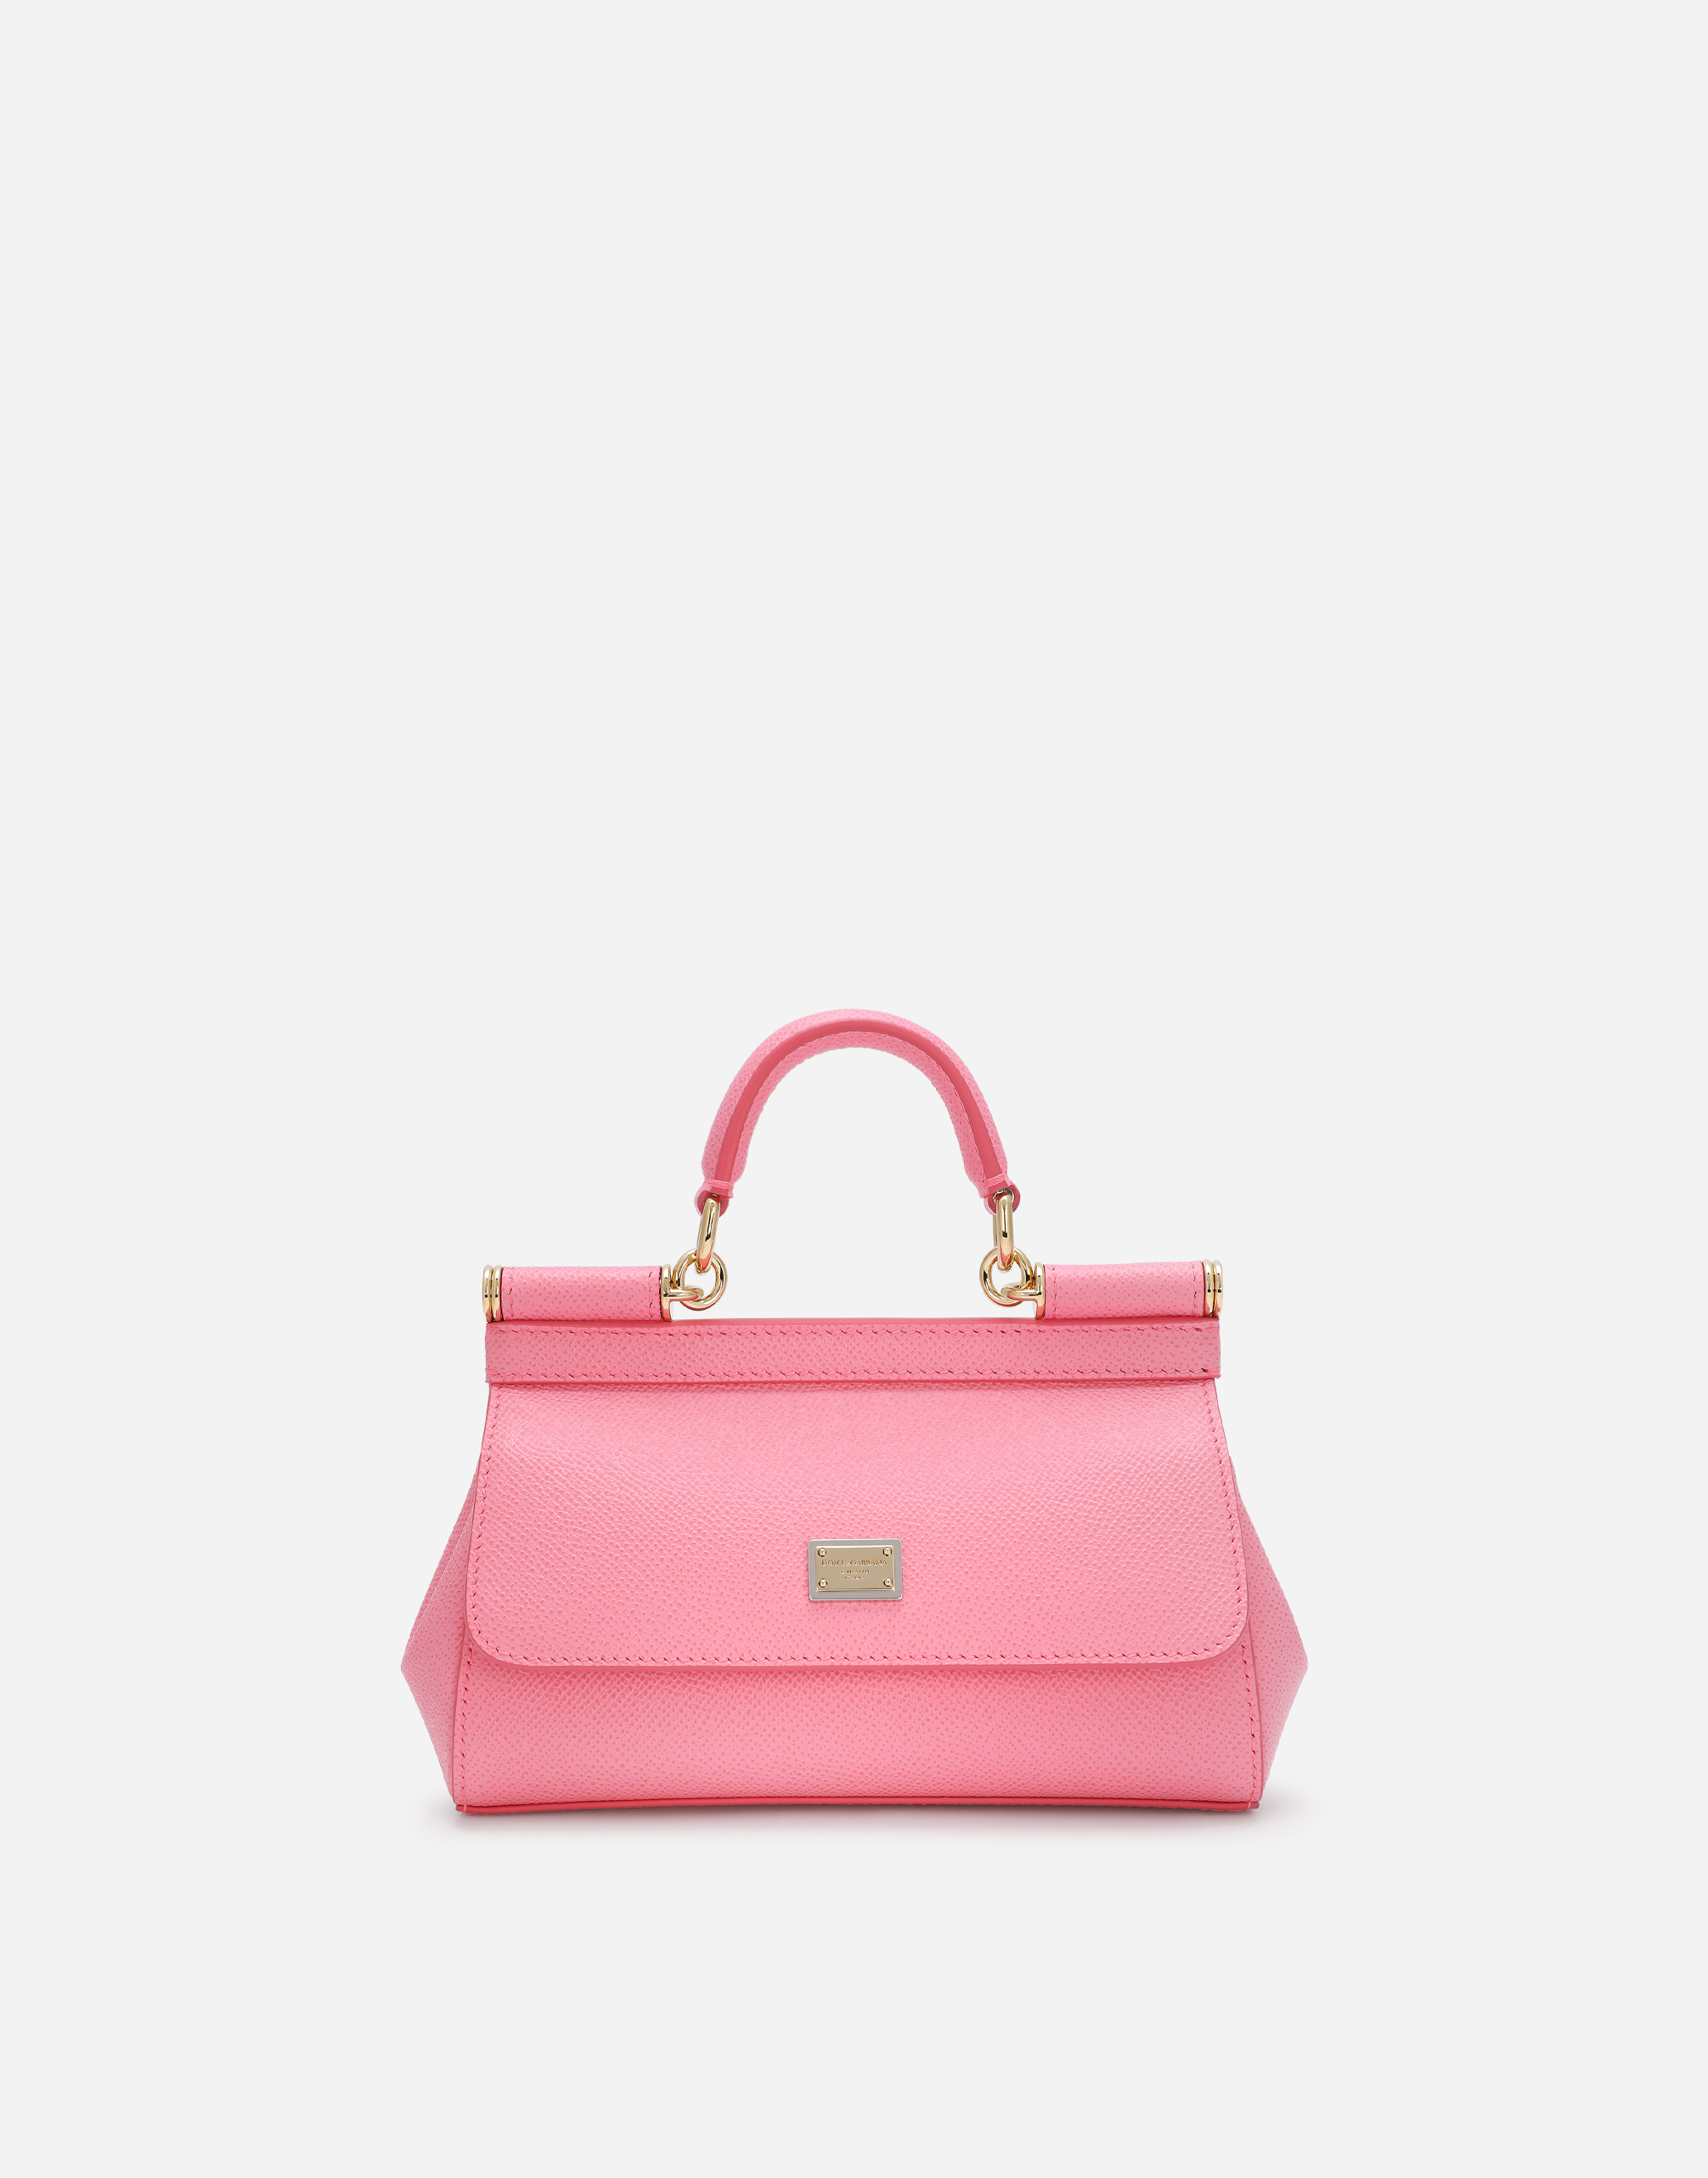 BORSA A MANO in Pink